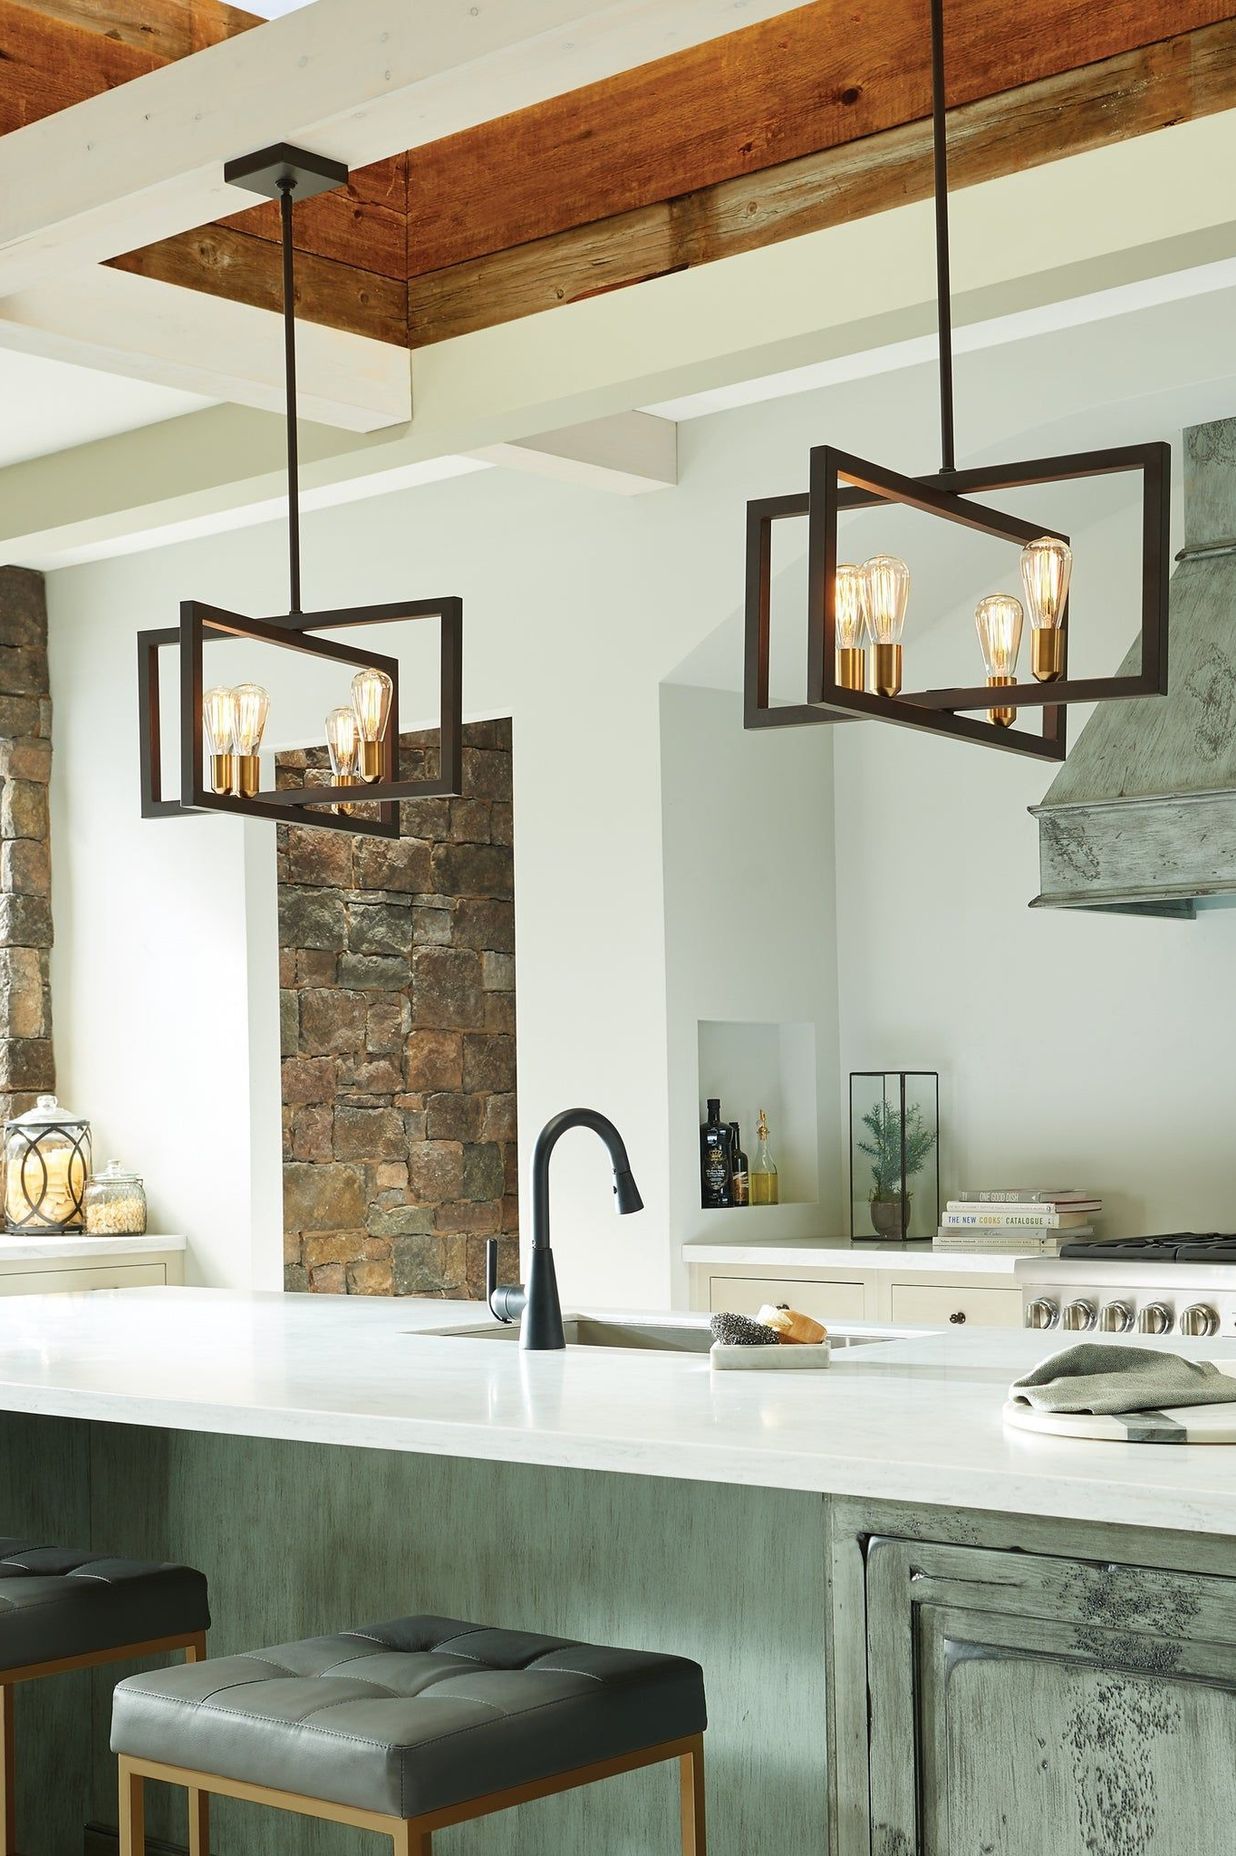 These lights create an inviting atmosphere in this kitchen. Featured product: Finnegan Large Pendant by Urban Lighting.